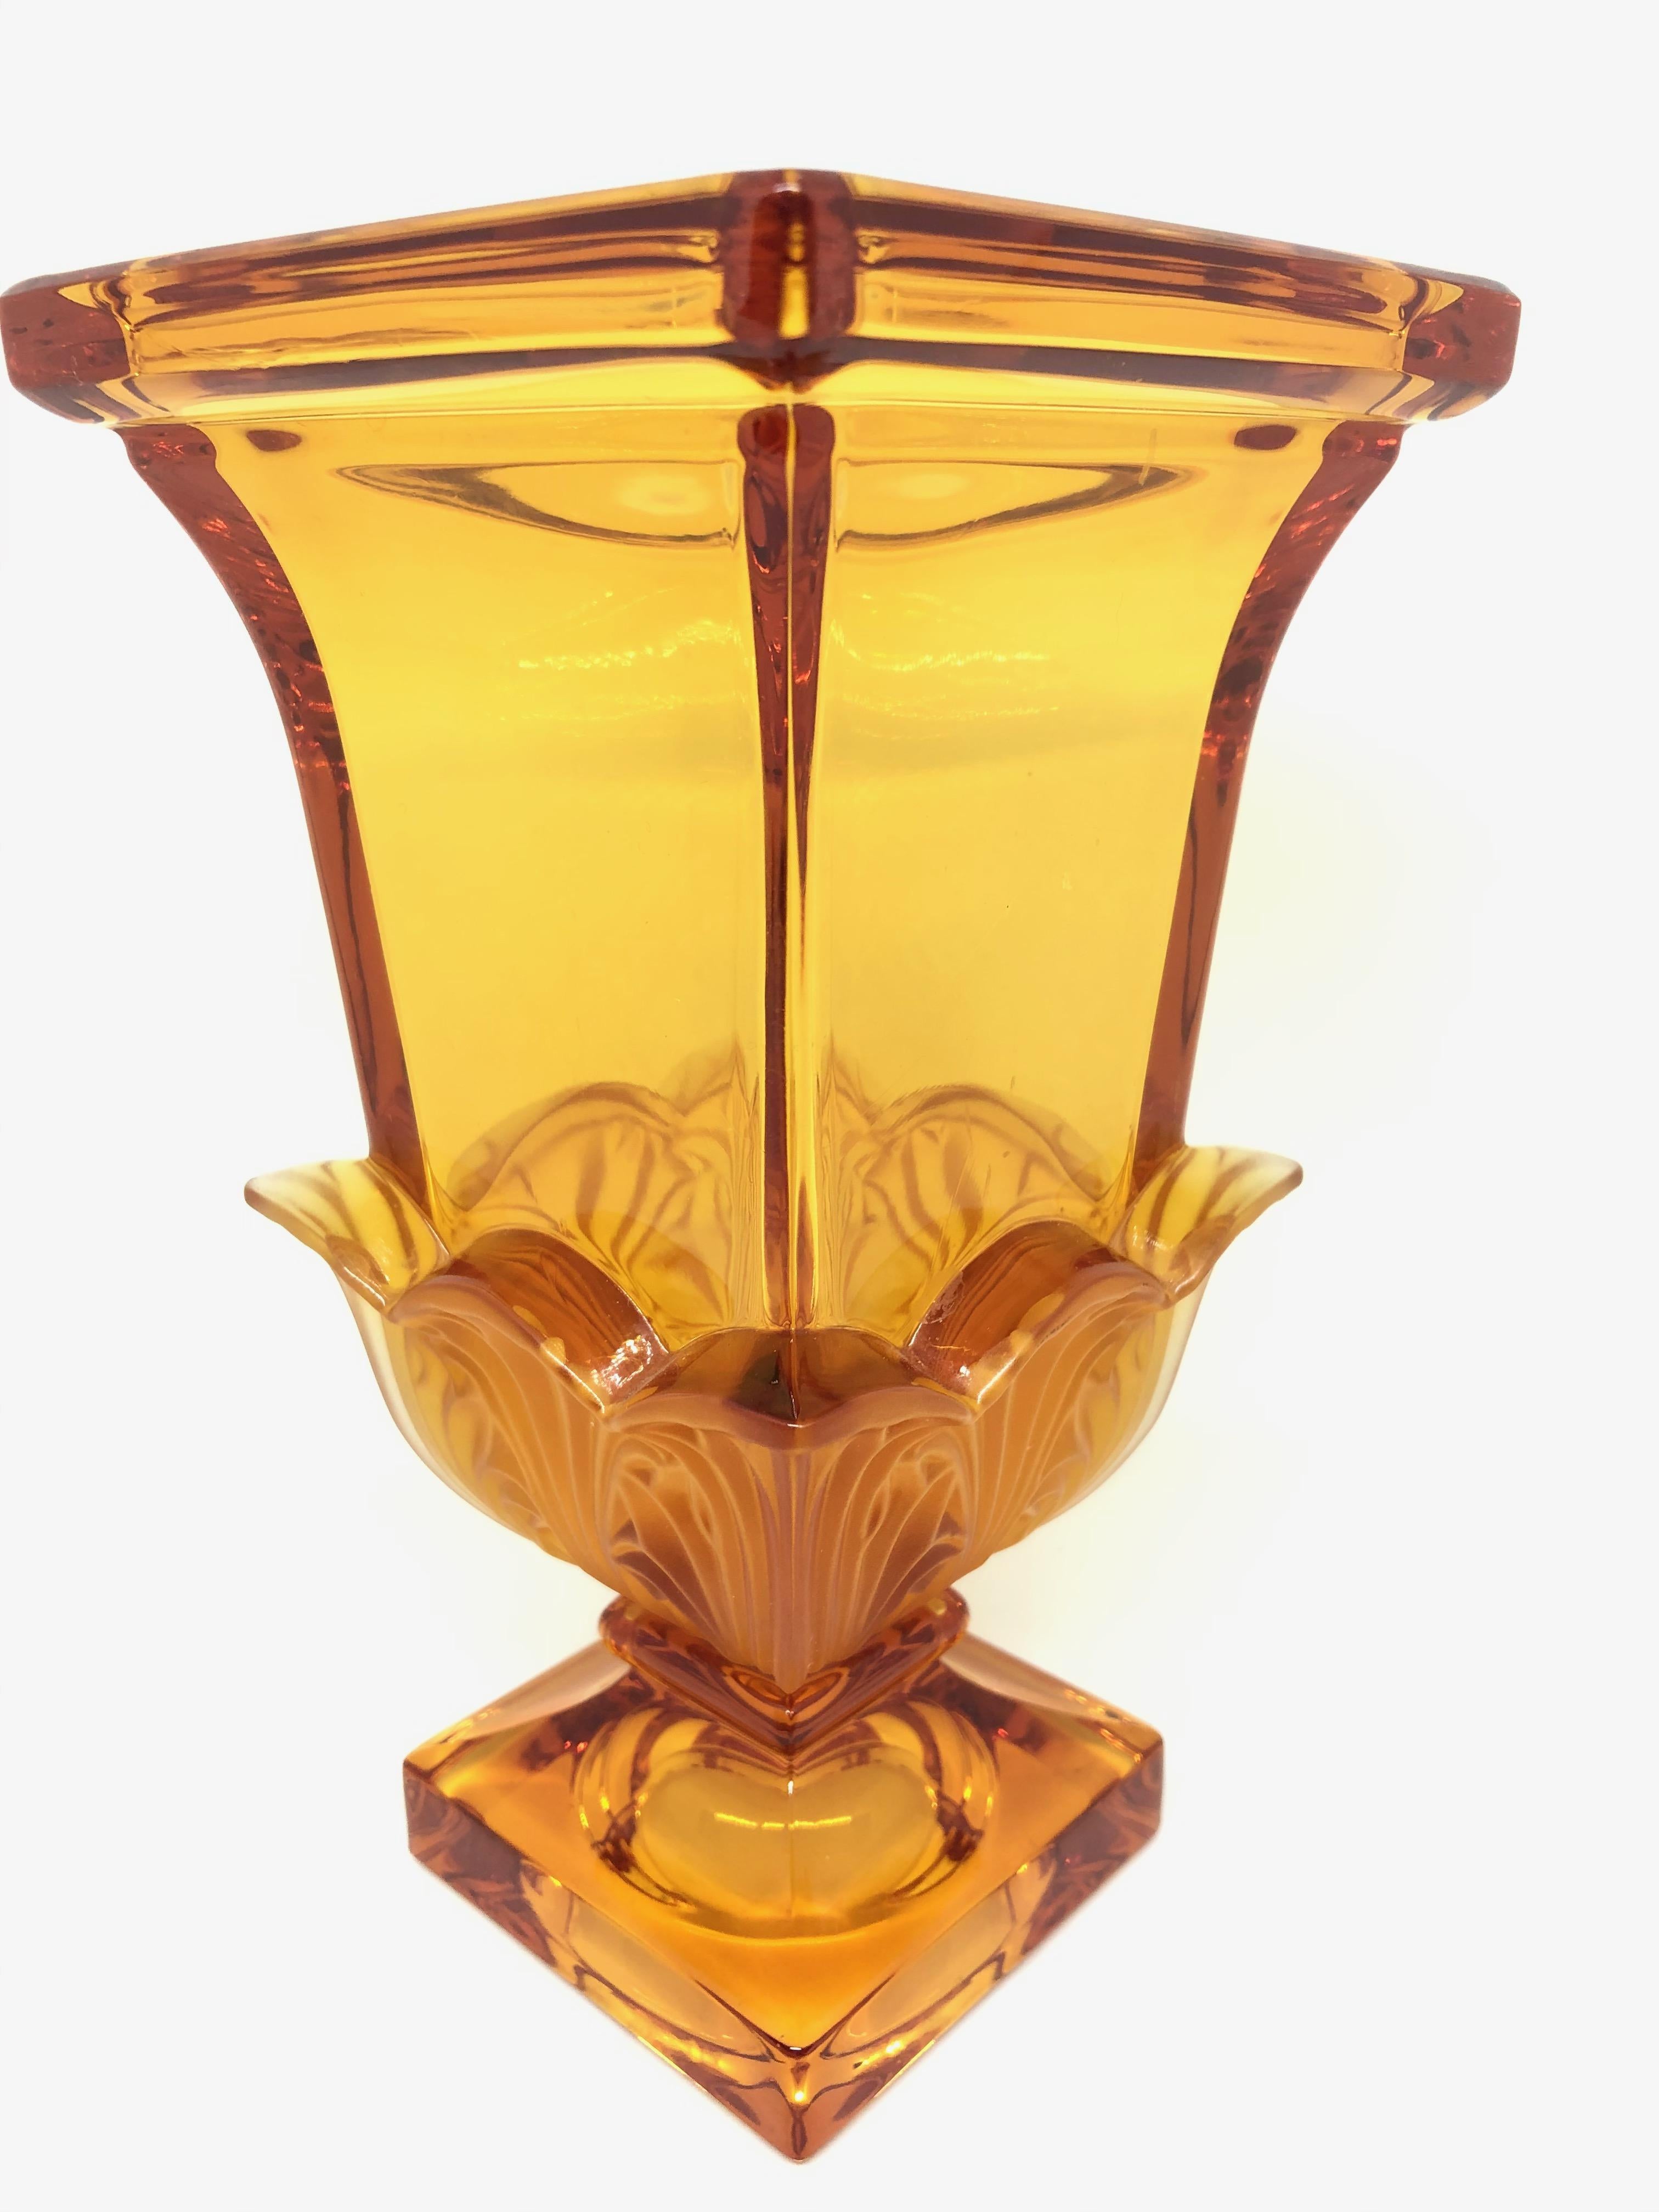 Hand-Crafted Josephinenhuette Moser Style Amber colored Glass footed Vase Catchall, 1920s